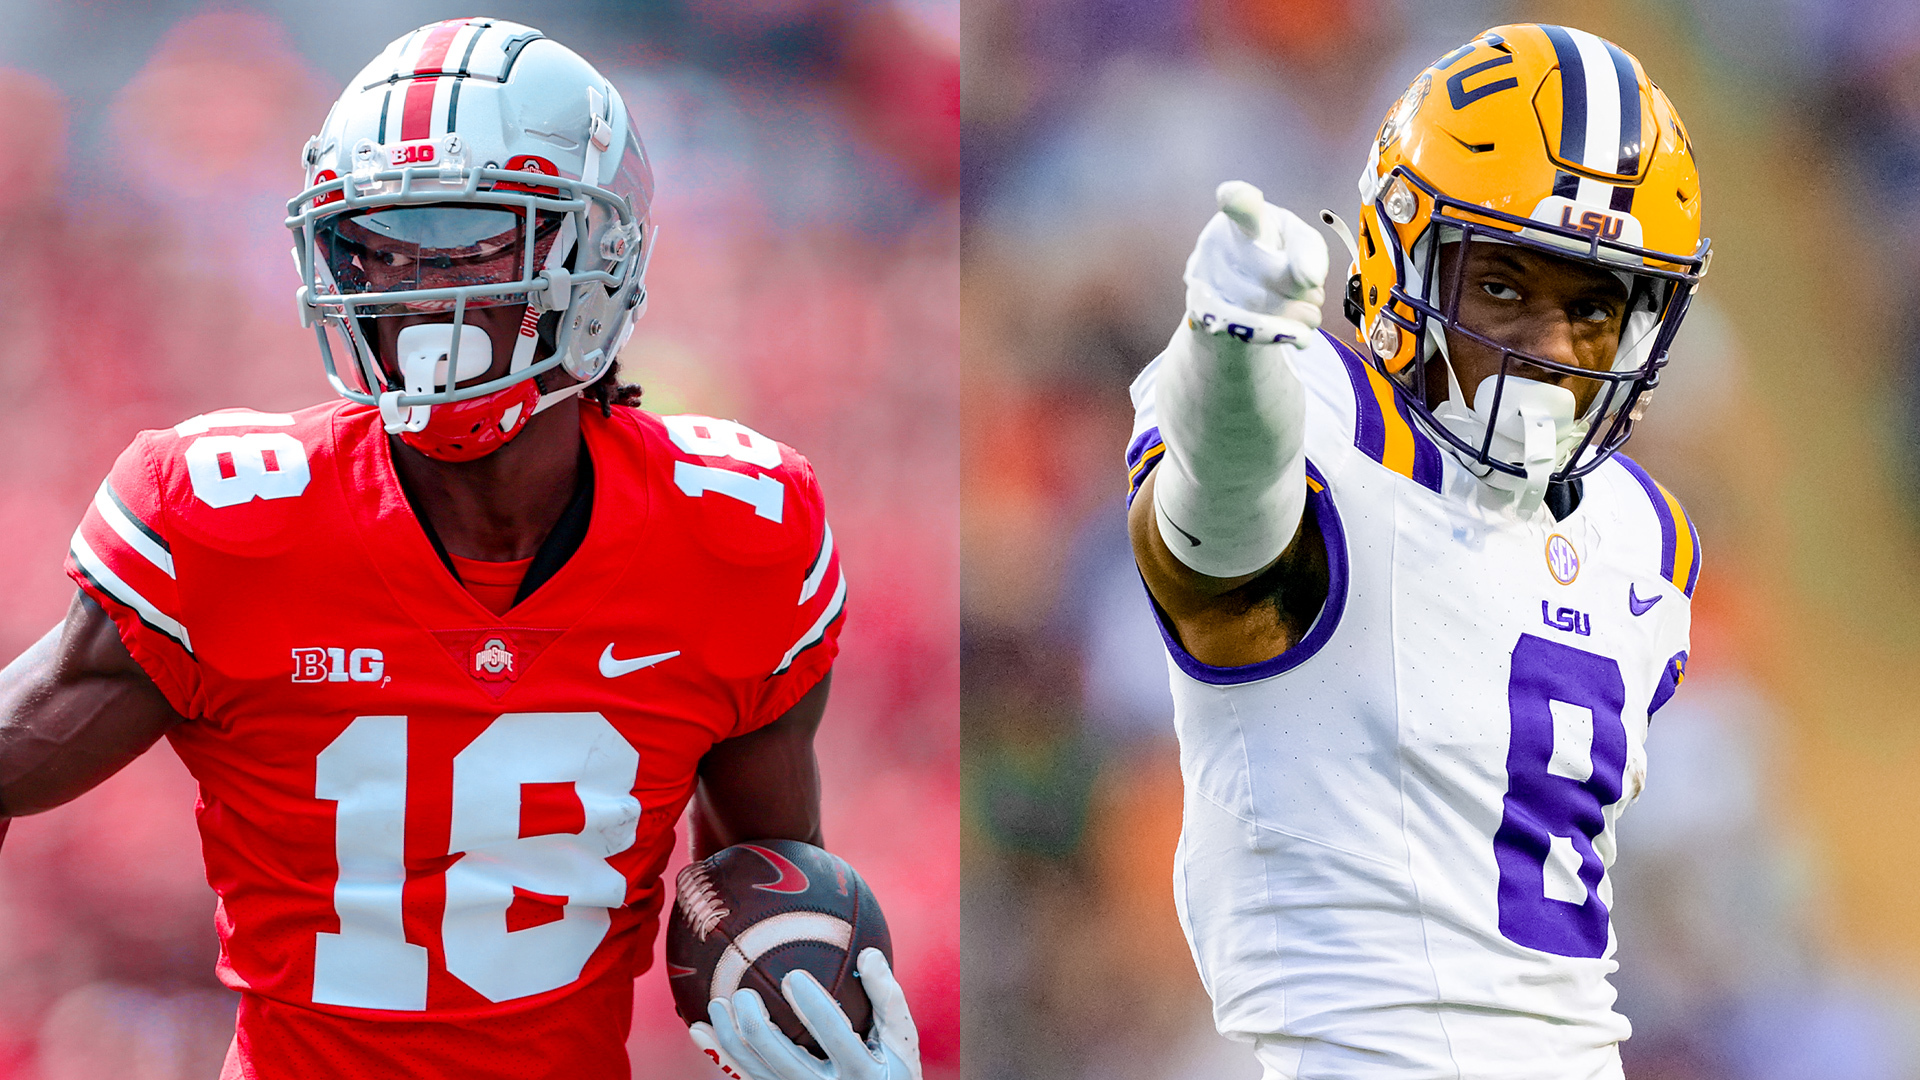 Ohio State WR Marvin Harrison Jr. is pictured left, LSU WR Malik Nabers pictured right